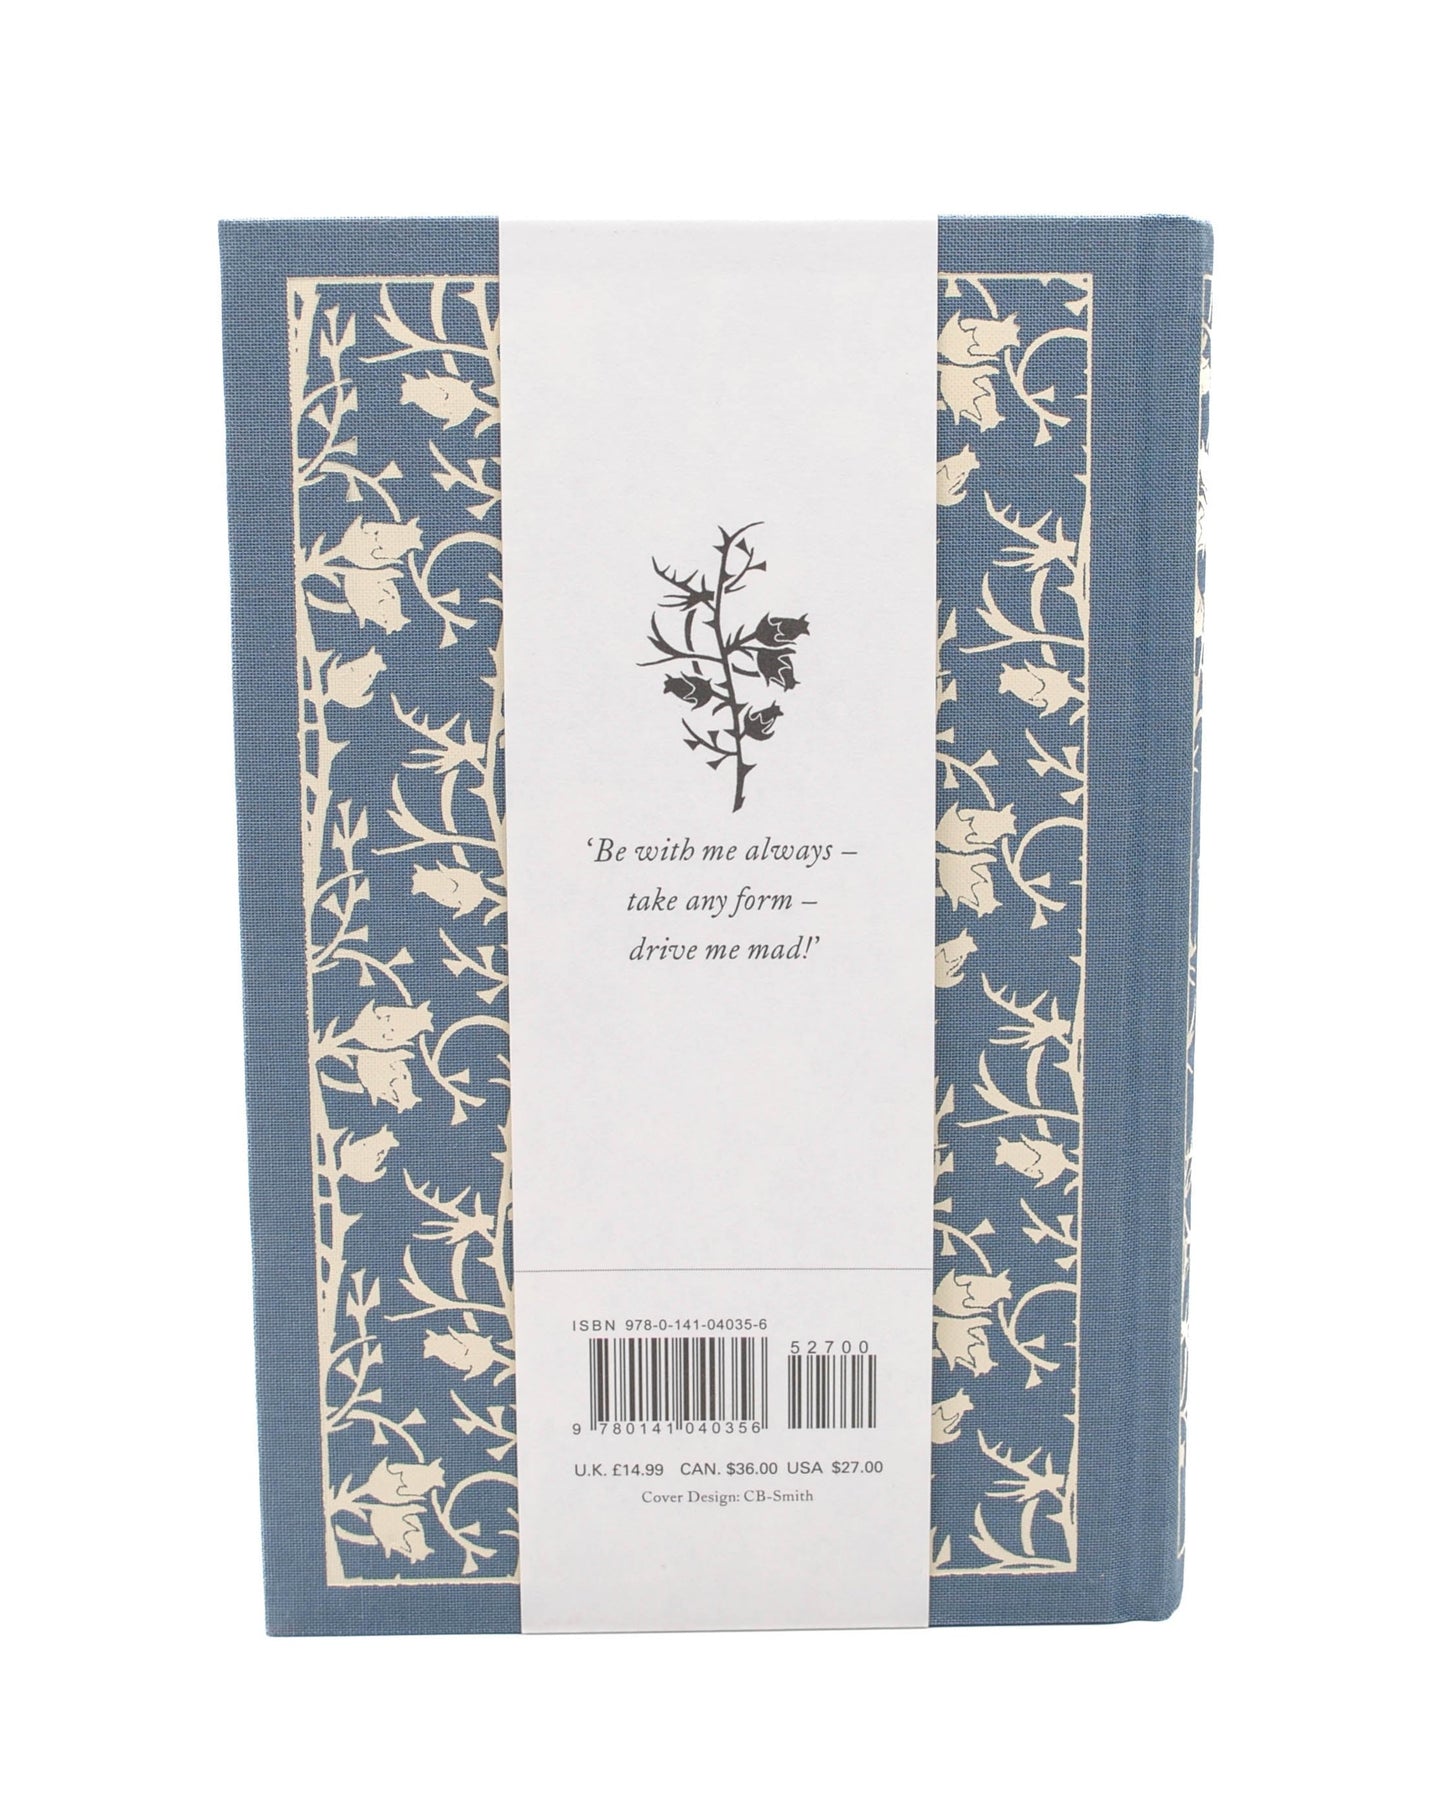 Wuthering Heights (Penguin Clothbound Classics) by Emily Bronte